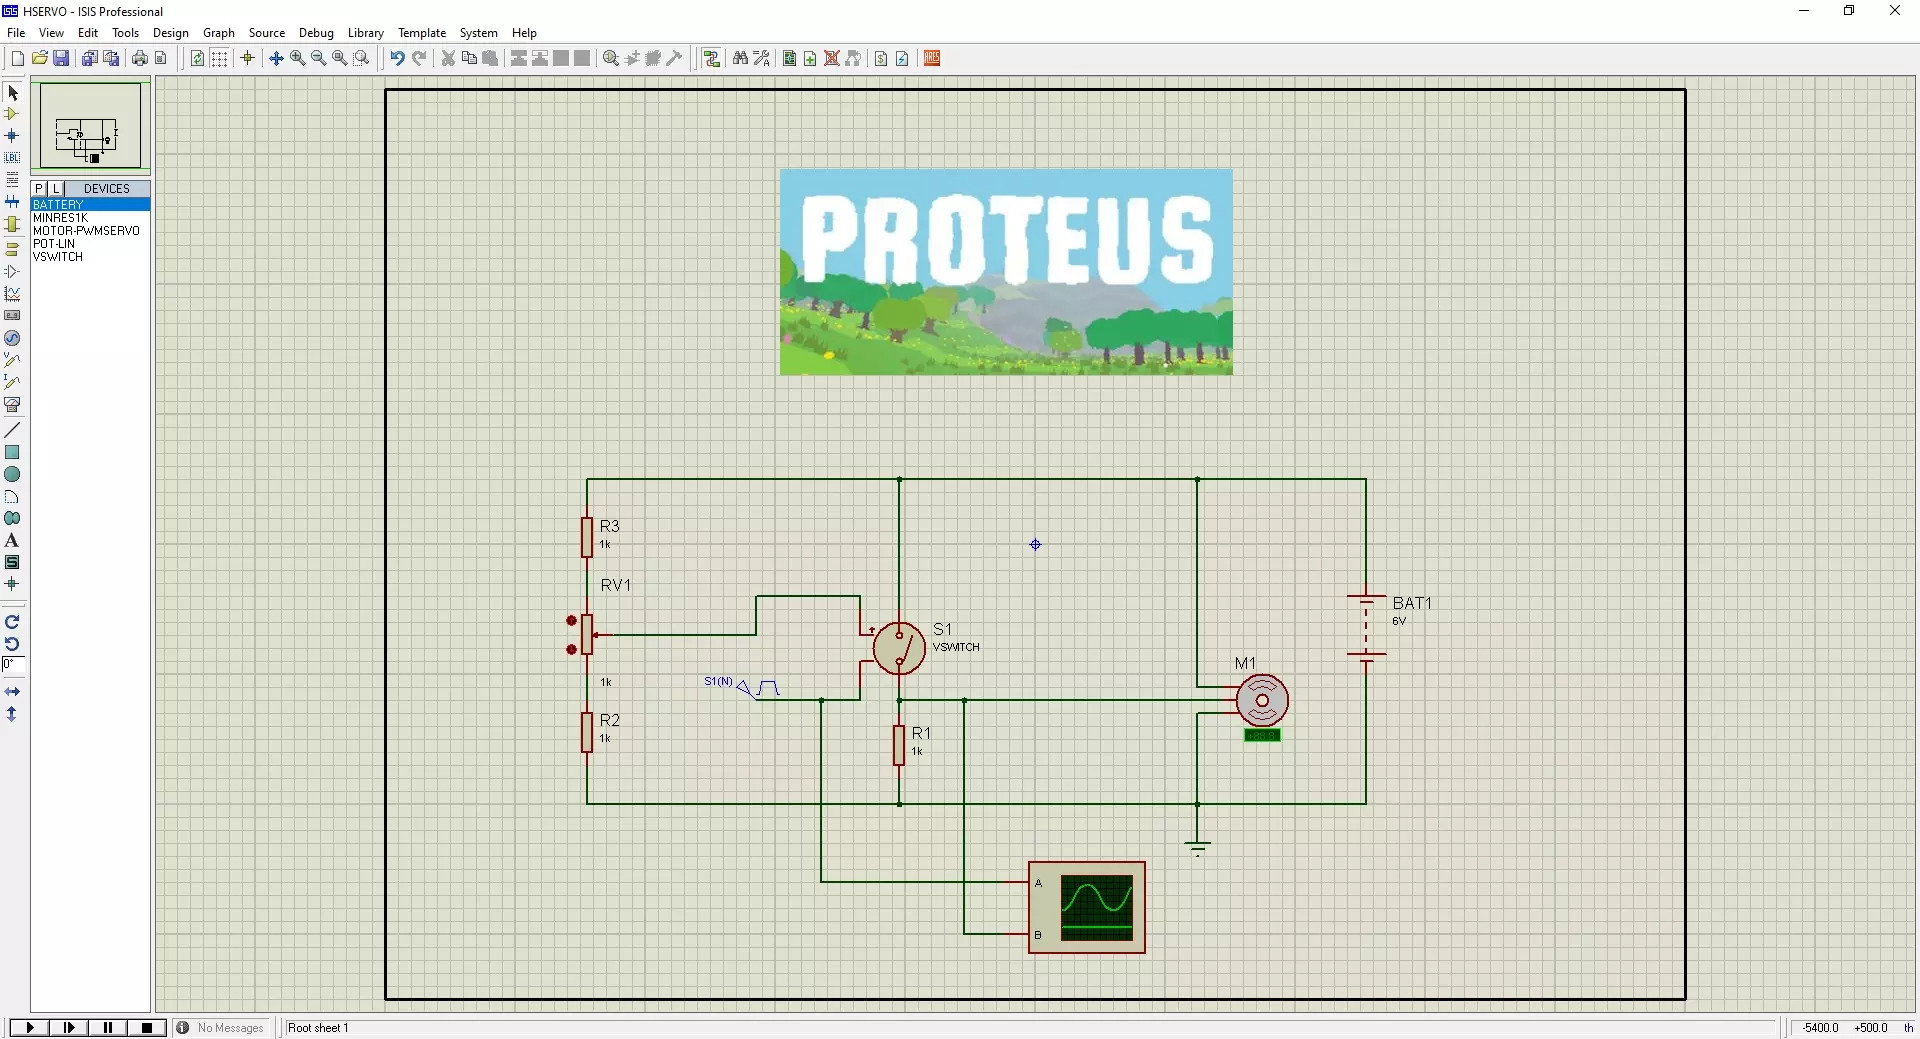 Proteus pcb design software free download 123myit windows 8.1 download